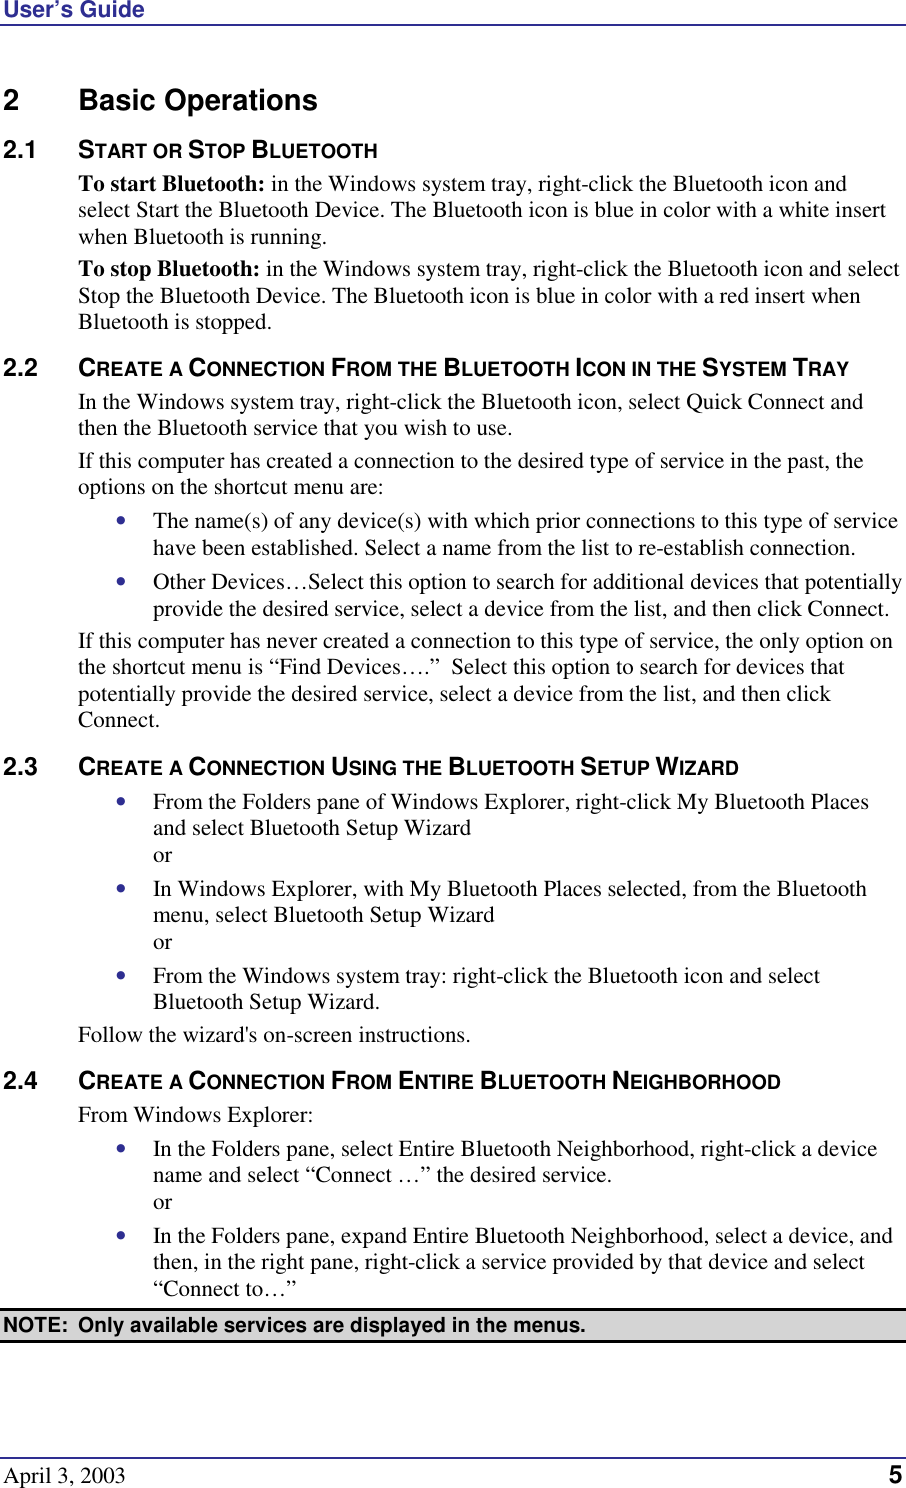 User’s Guide April 3, 2003  5 2 Basic Operations 2.1 START OR STOP BLUETOOTH To start Bluetooth: in the Windows system tray, right-click the Bluetooth icon and select Start the Bluetooth Device. The Bluetooth icon is blue in color with a white insert when Bluetooth is running. To stop Bluetooth: in the Windows system tray, right-click the Bluetooth icon and select Stop the Bluetooth Device. The Bluetooth icon is blue in color with a red insert when Bluetooth is stopped.  2.2 CREATE A CONNECTION FROM THE BLUETOOTH ICON IN THE SYSTEM TRAY In the Windows system tray, right-click the Bluetooth icon, select Quick Connect and then the Bluetooth service that you wish to use. If this computer has created a connection to the desired type of service in the past, the options on the shortcut menu are: •  The name(s) of any device(s) with which prior connections to this type of service have been established. Select a name from the list to re-establish connection. •  Other Devices…Select this option to search for additional devices that potentially provide the desired service, select a device from the list, and then click Connect. If this computer has never created a connection to this type of service, the only option on the shortcut menu is “Find Devices….”  Select this option to search for devices that potentially provide the desired service, select a device from the list, and then click Connect. 2.3 CREATE A CONNECTION USING THE BLUETOOTH SETUP WIZARD •  From the Folders pane of Windows Explorer, right-click My Bluetooth Places and select Bluetooth Setup Wizard or •  In Windows Explorer, with My Bluetooth Places selected, from the Bluetooth menu, select Bluetooth Setup Wizard or •  From the Windows system tray: right-click the Bluetooth icon and select Bluetooth Setup Wizard. Follow the wizard&apos;s on-screen instructions. 2.4 CREATE A CONNECTION FROM ENTIRE BLUETOOTH NEIGHBORHOOD From Windows Explorer: •  In the Folders pane, select Entire Bluetooth Neighborhood, right-click a device name and select “Connect …” the desired service.  or •  In the Folders pane, expand Entire Bluetooth Neighborhood, select a device, and then, in the right pane, right-click a service provided by that device and select “Connect to…” NOTE:  Only available services are displayed in the menus. 